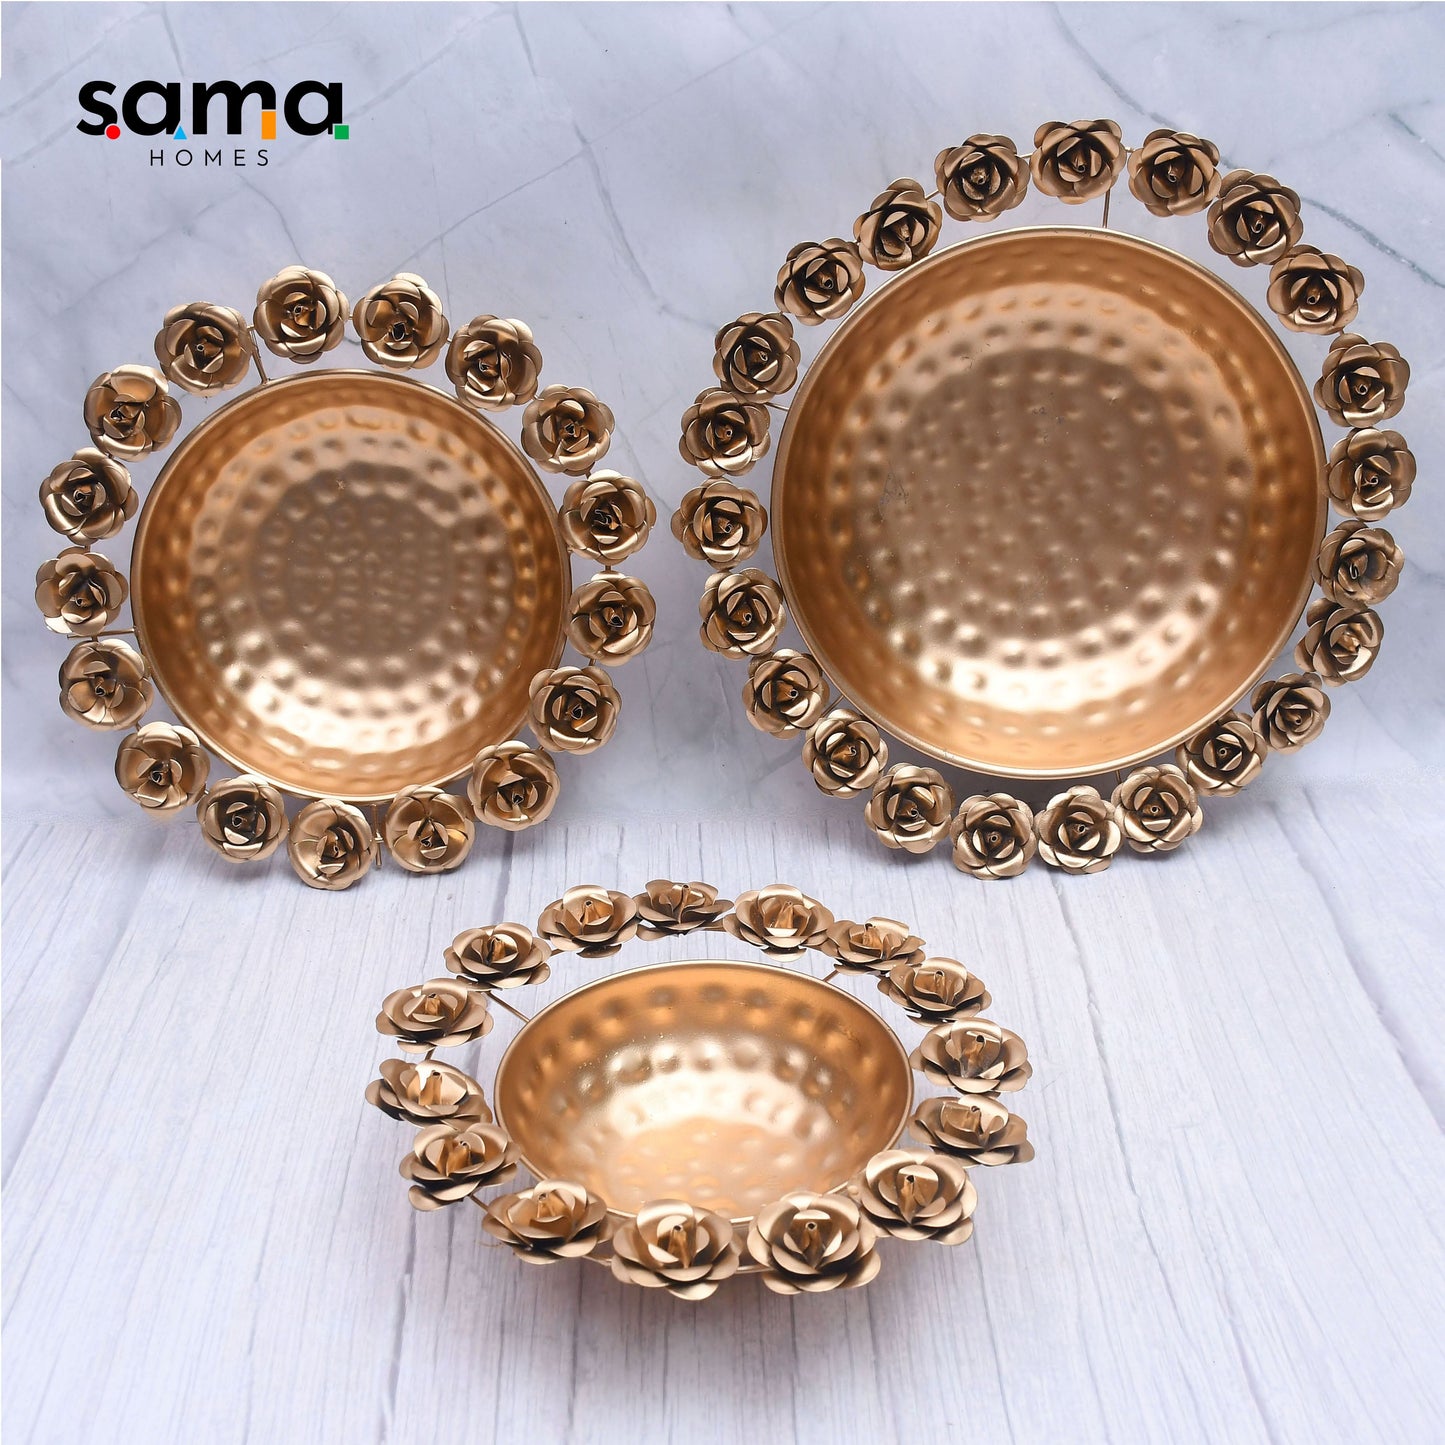 SAMA Homes - exclusive metal rose design urli bowl for home decor for floating flowers and candles